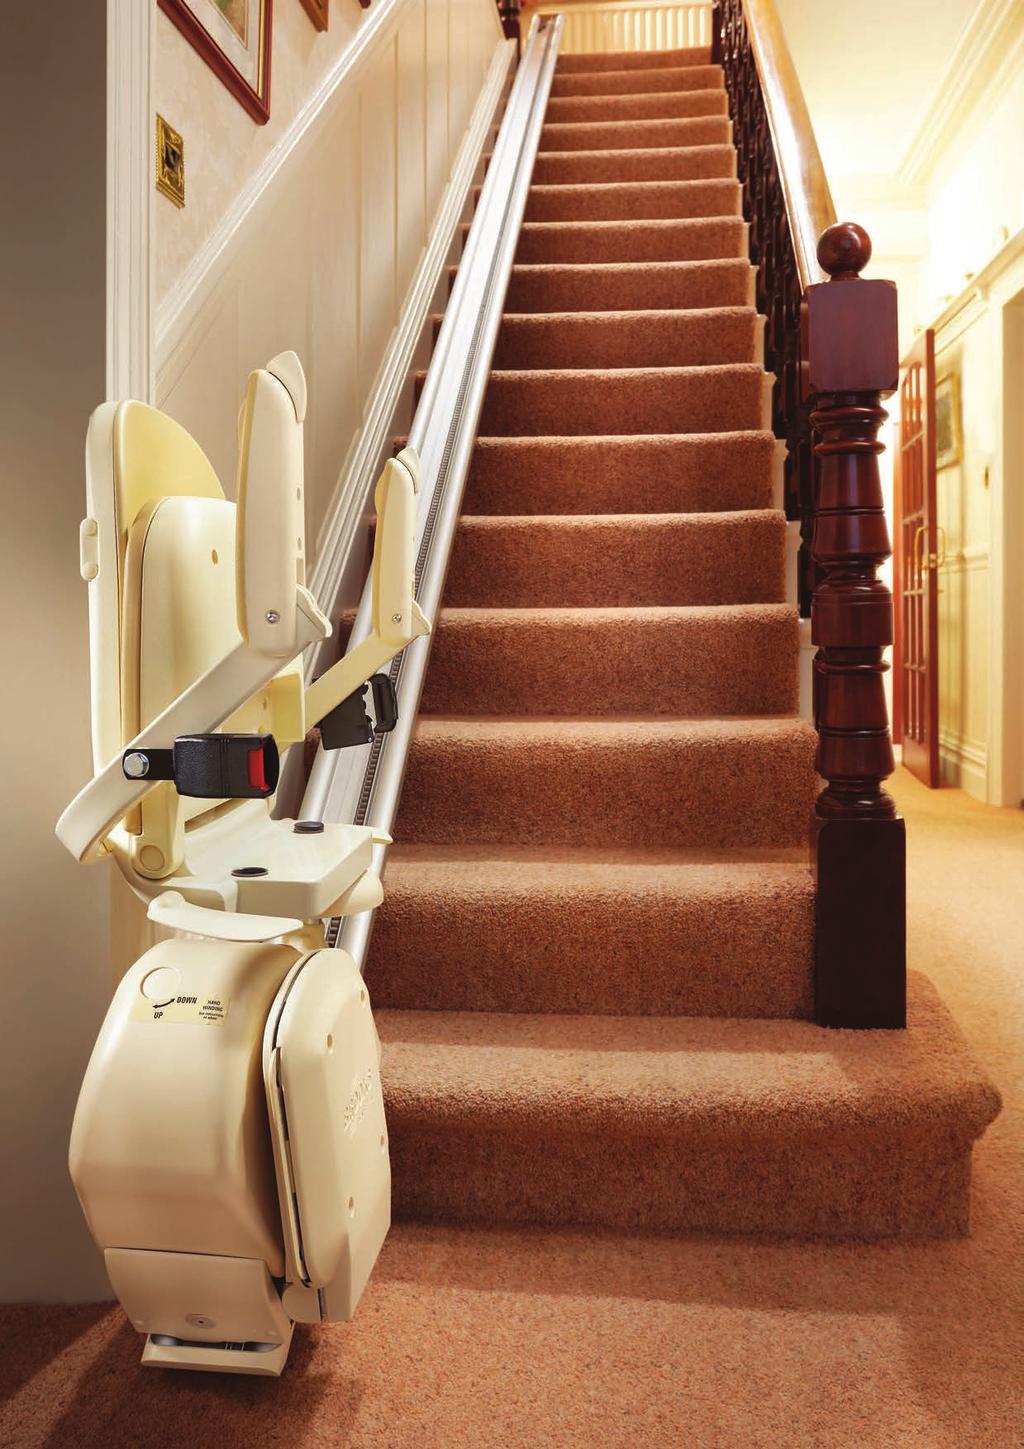 All Brooks Stairlifts are